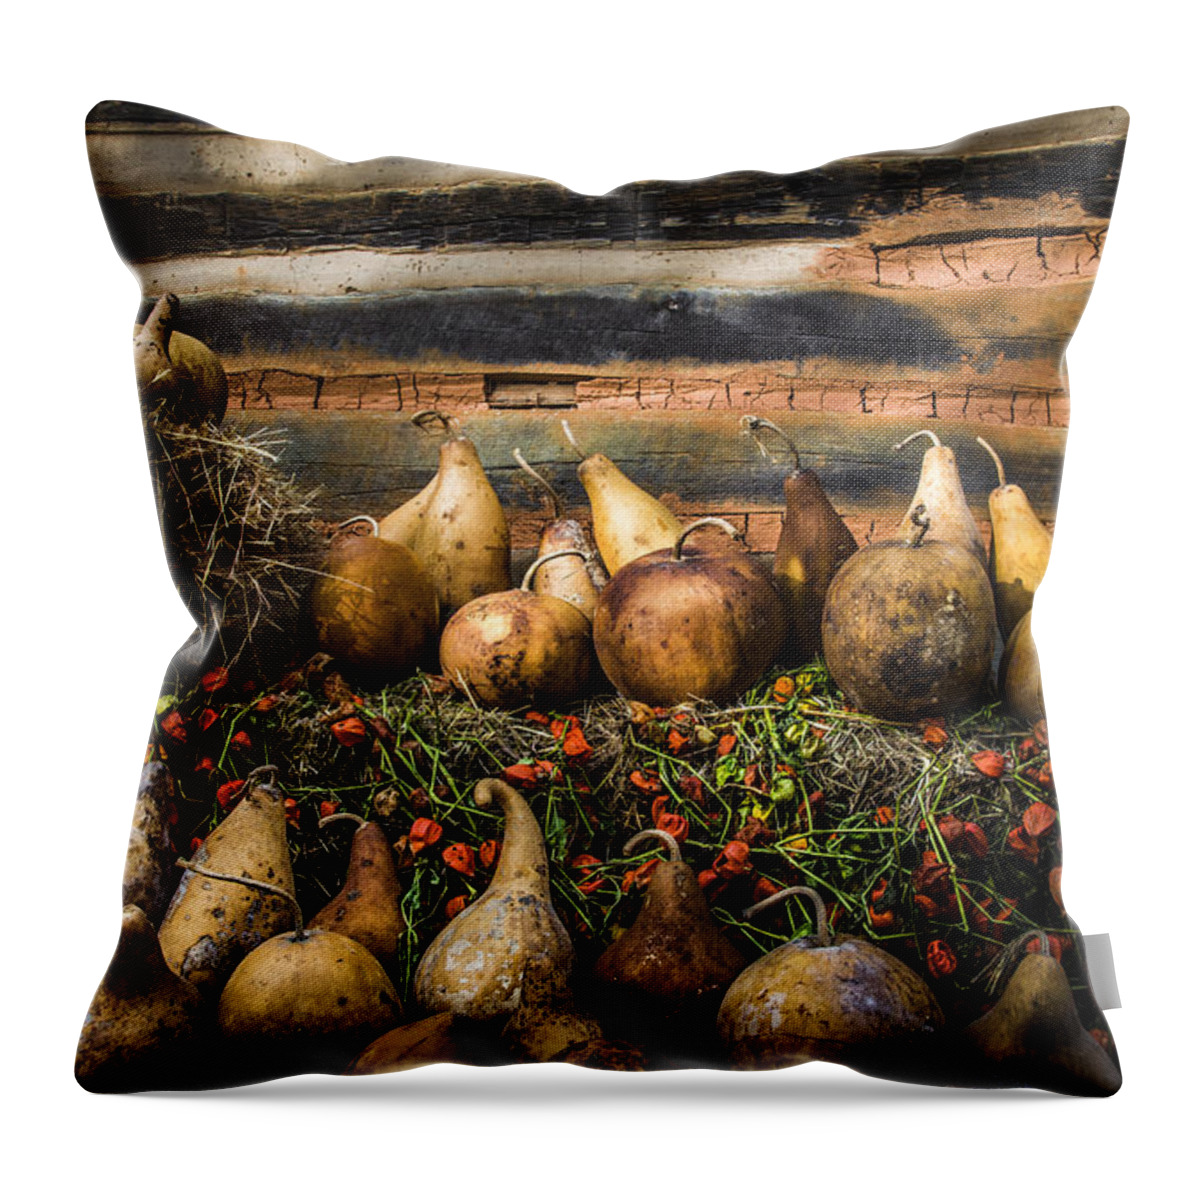 Appalachia Throw Pillow featuring the photograph Gourds by Debra and Dave Vanderlaan